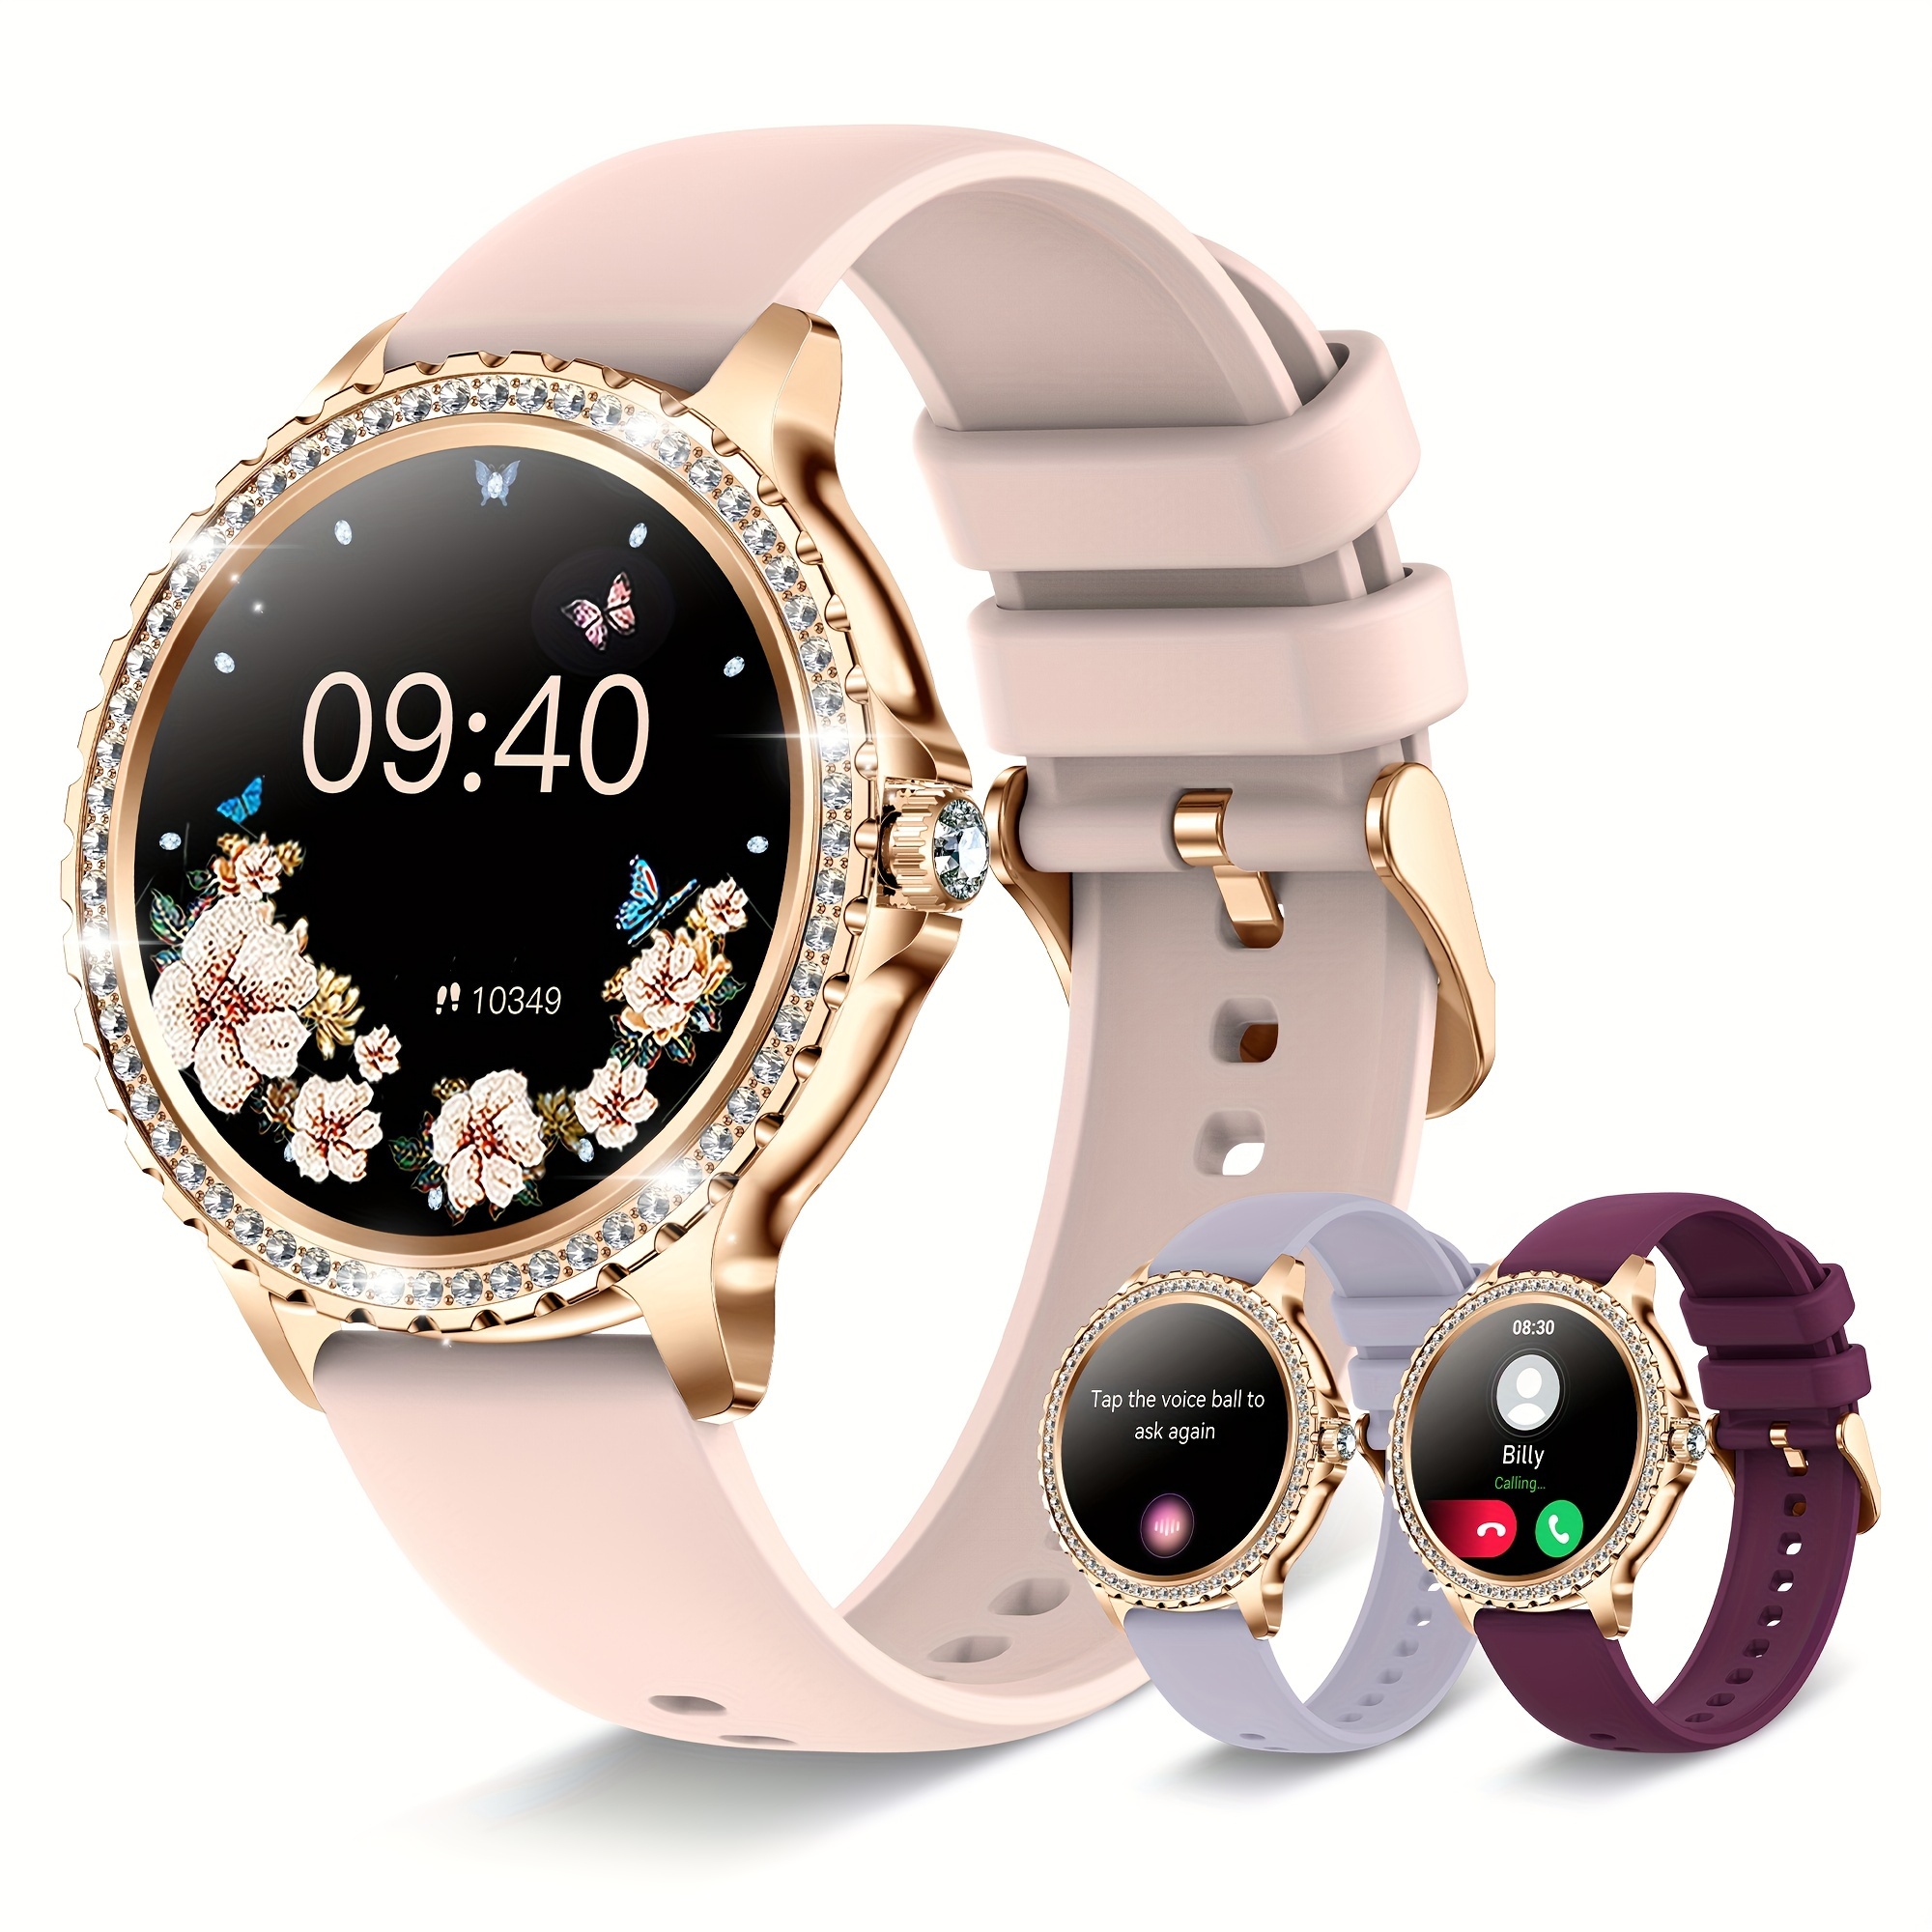 

Elegant Womens Smart Watch - Wireless Calling & Fitness Tracking - Step Counter & Message Alerts, Ideal For Iphone/android Users